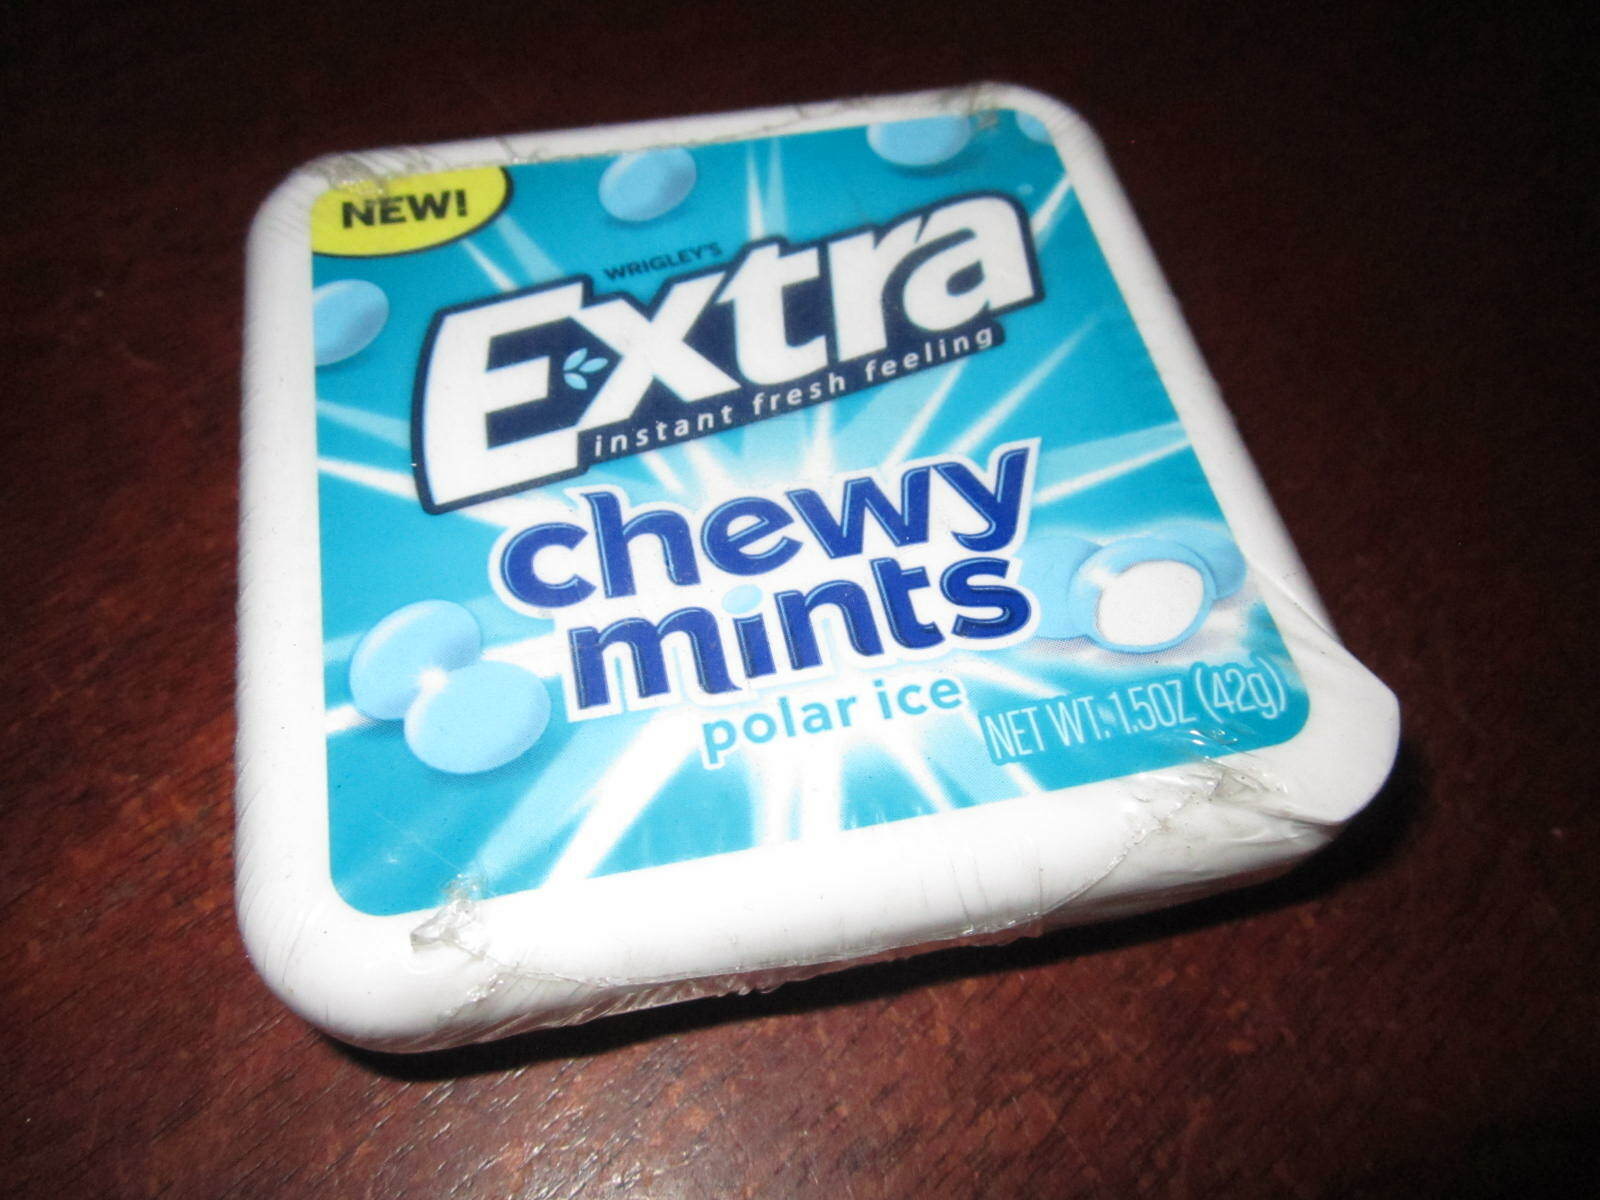 extra chewy mints polar ice (1 Sealed Tin) Discontinued, Extremely RARE & HTF